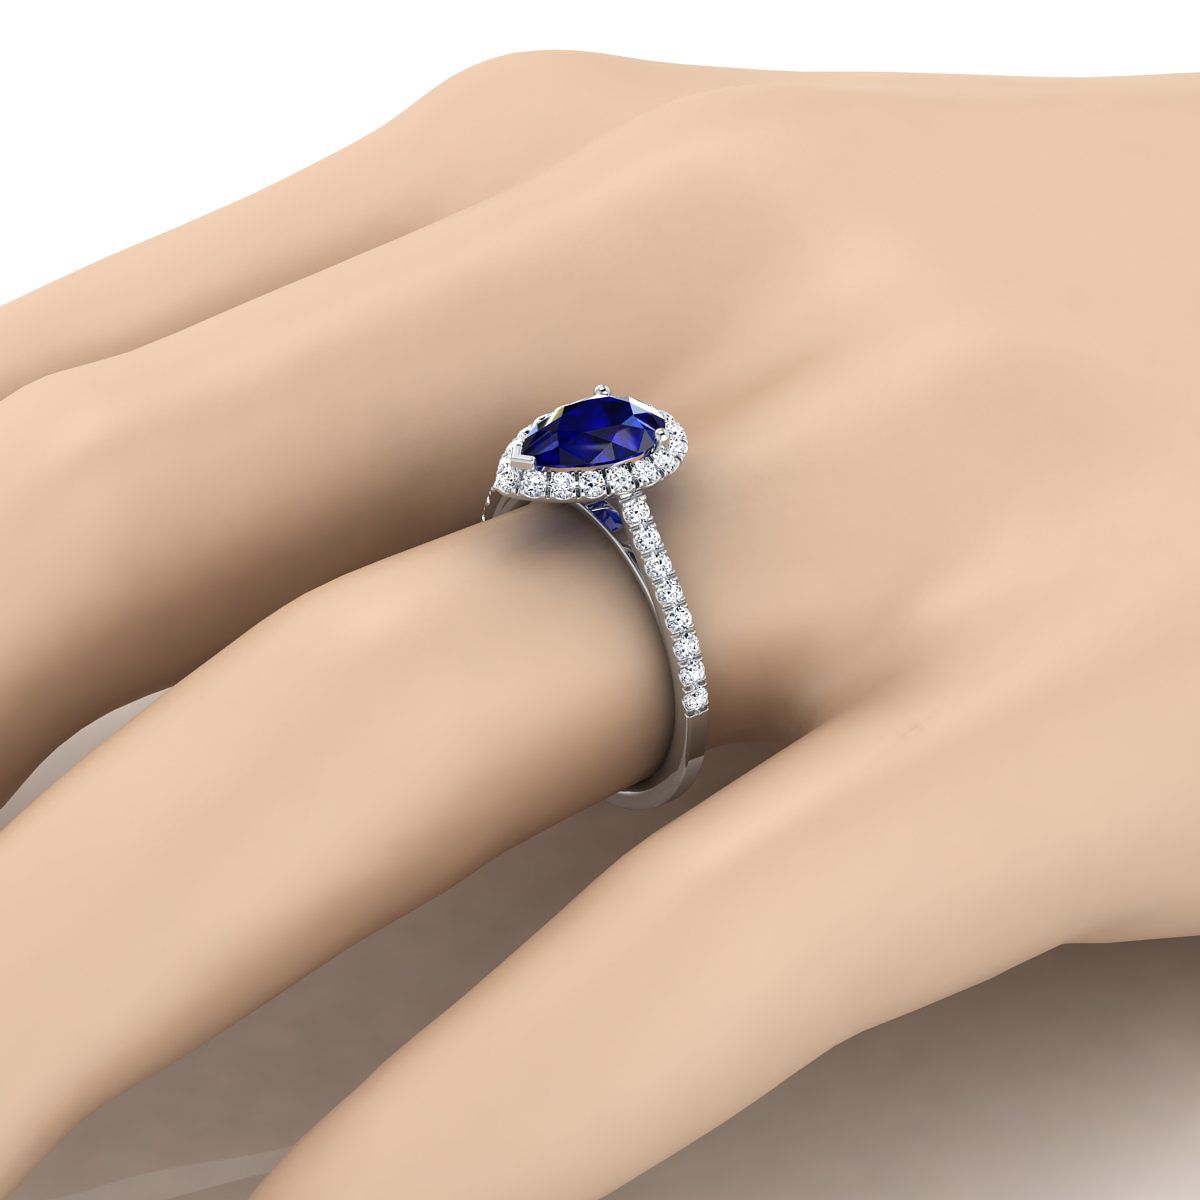 18K White Gold Pear Shape Center Sapphire Petite Halo French Diamond Pave Engagement Ring -3/8ctw